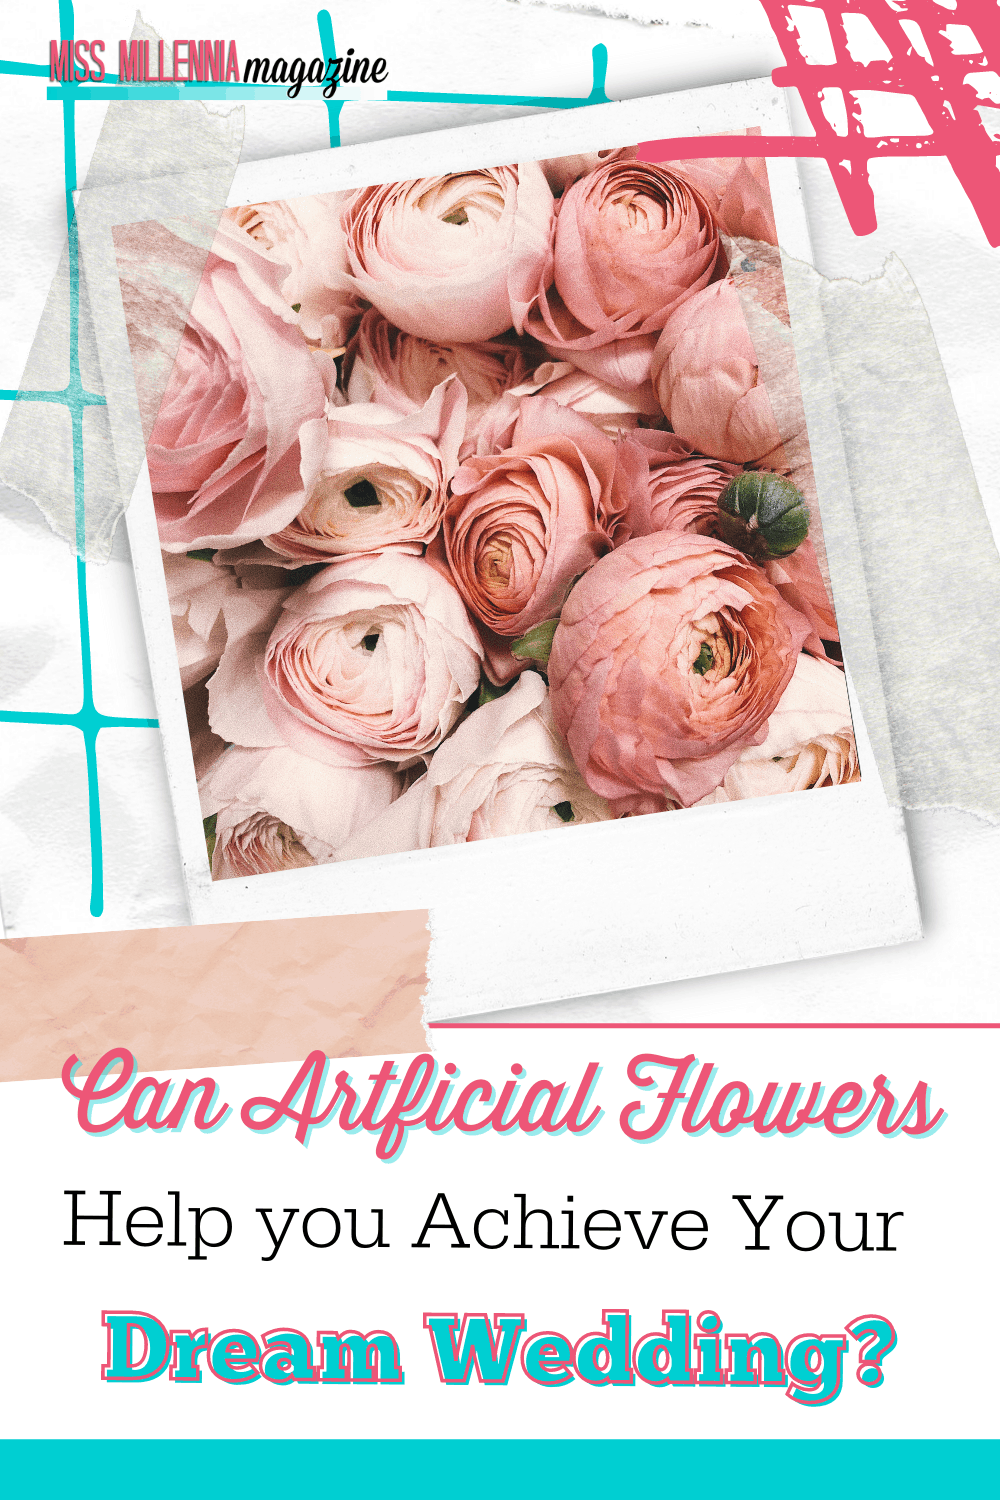 Can Artificial Flowers Help You Achieve Your Dream Wedding?